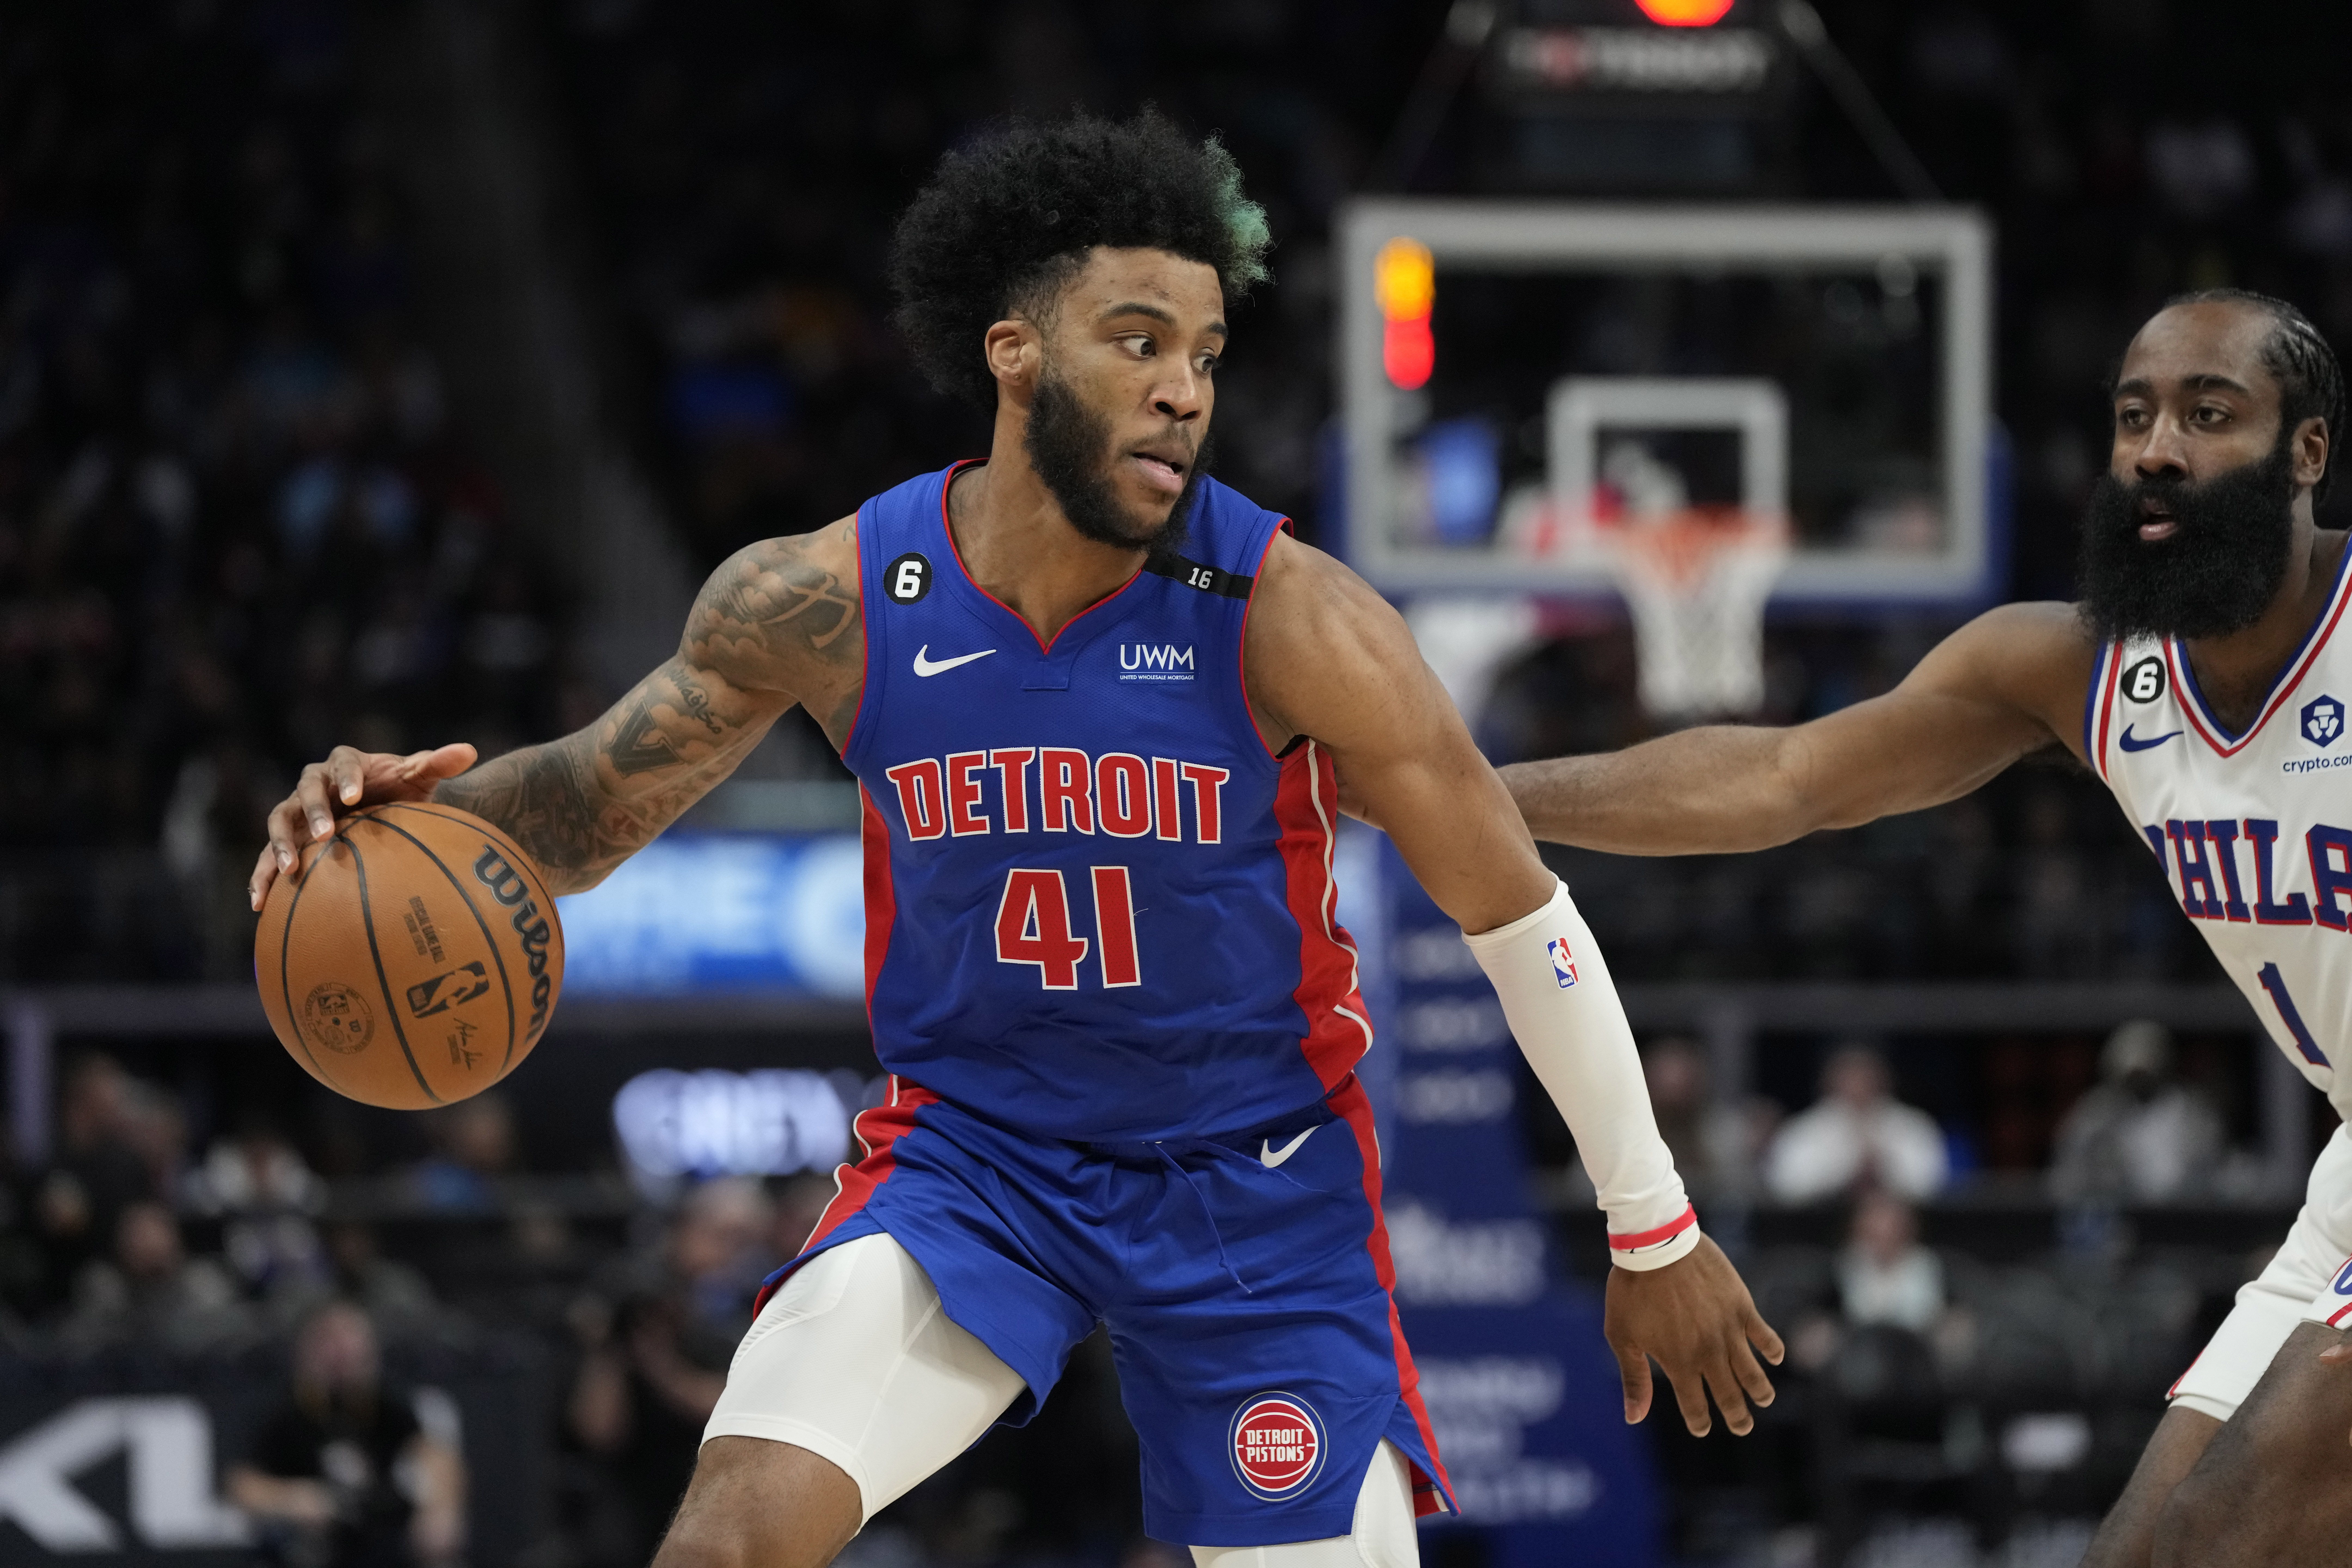 How to Watch the Detroit Pistons vs